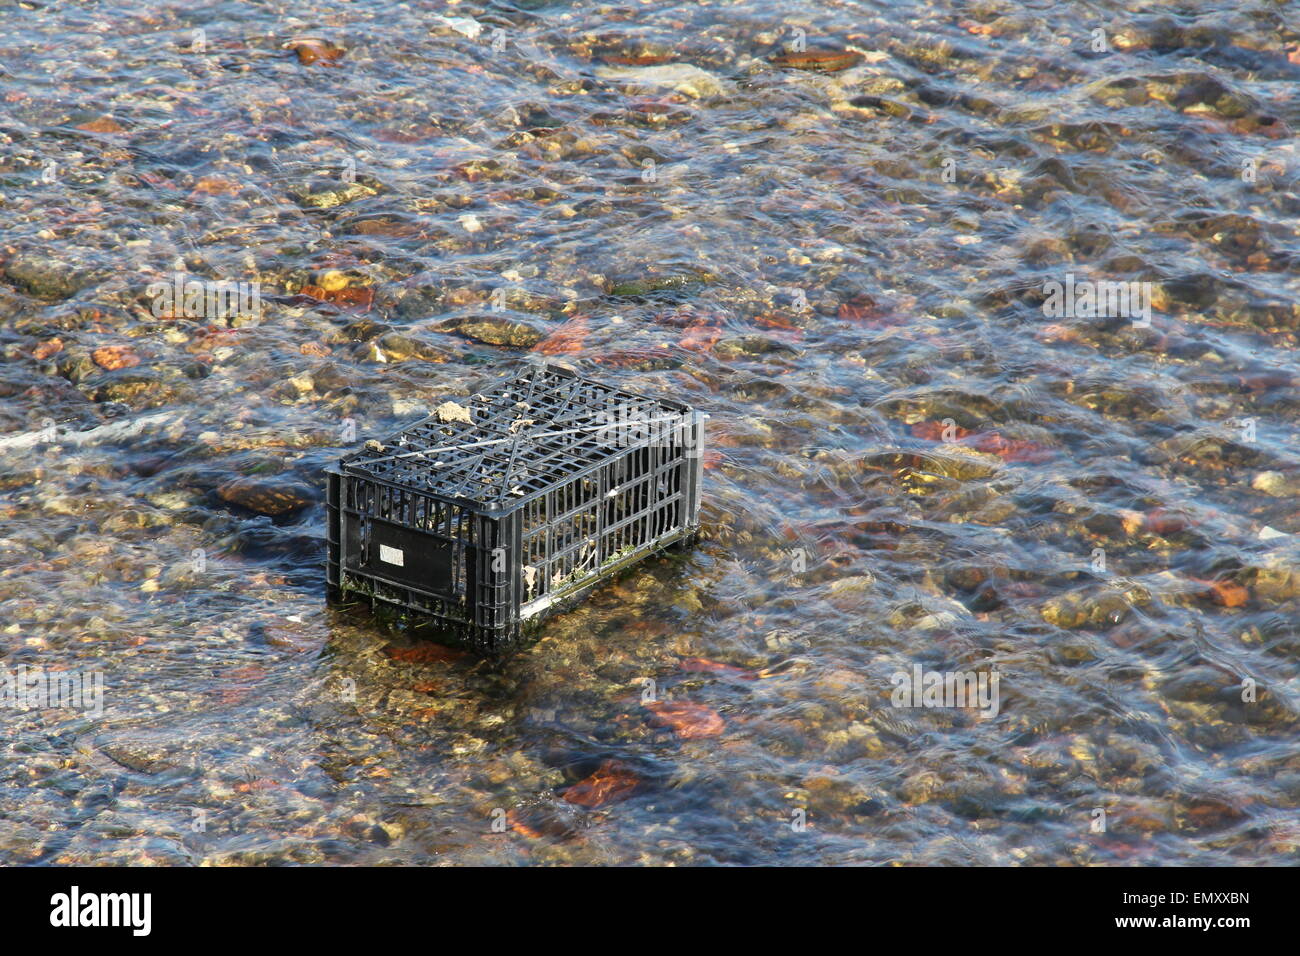 Dirty river pollution with plastic bag and toxic waste. Please care for the environment. Stock Photo